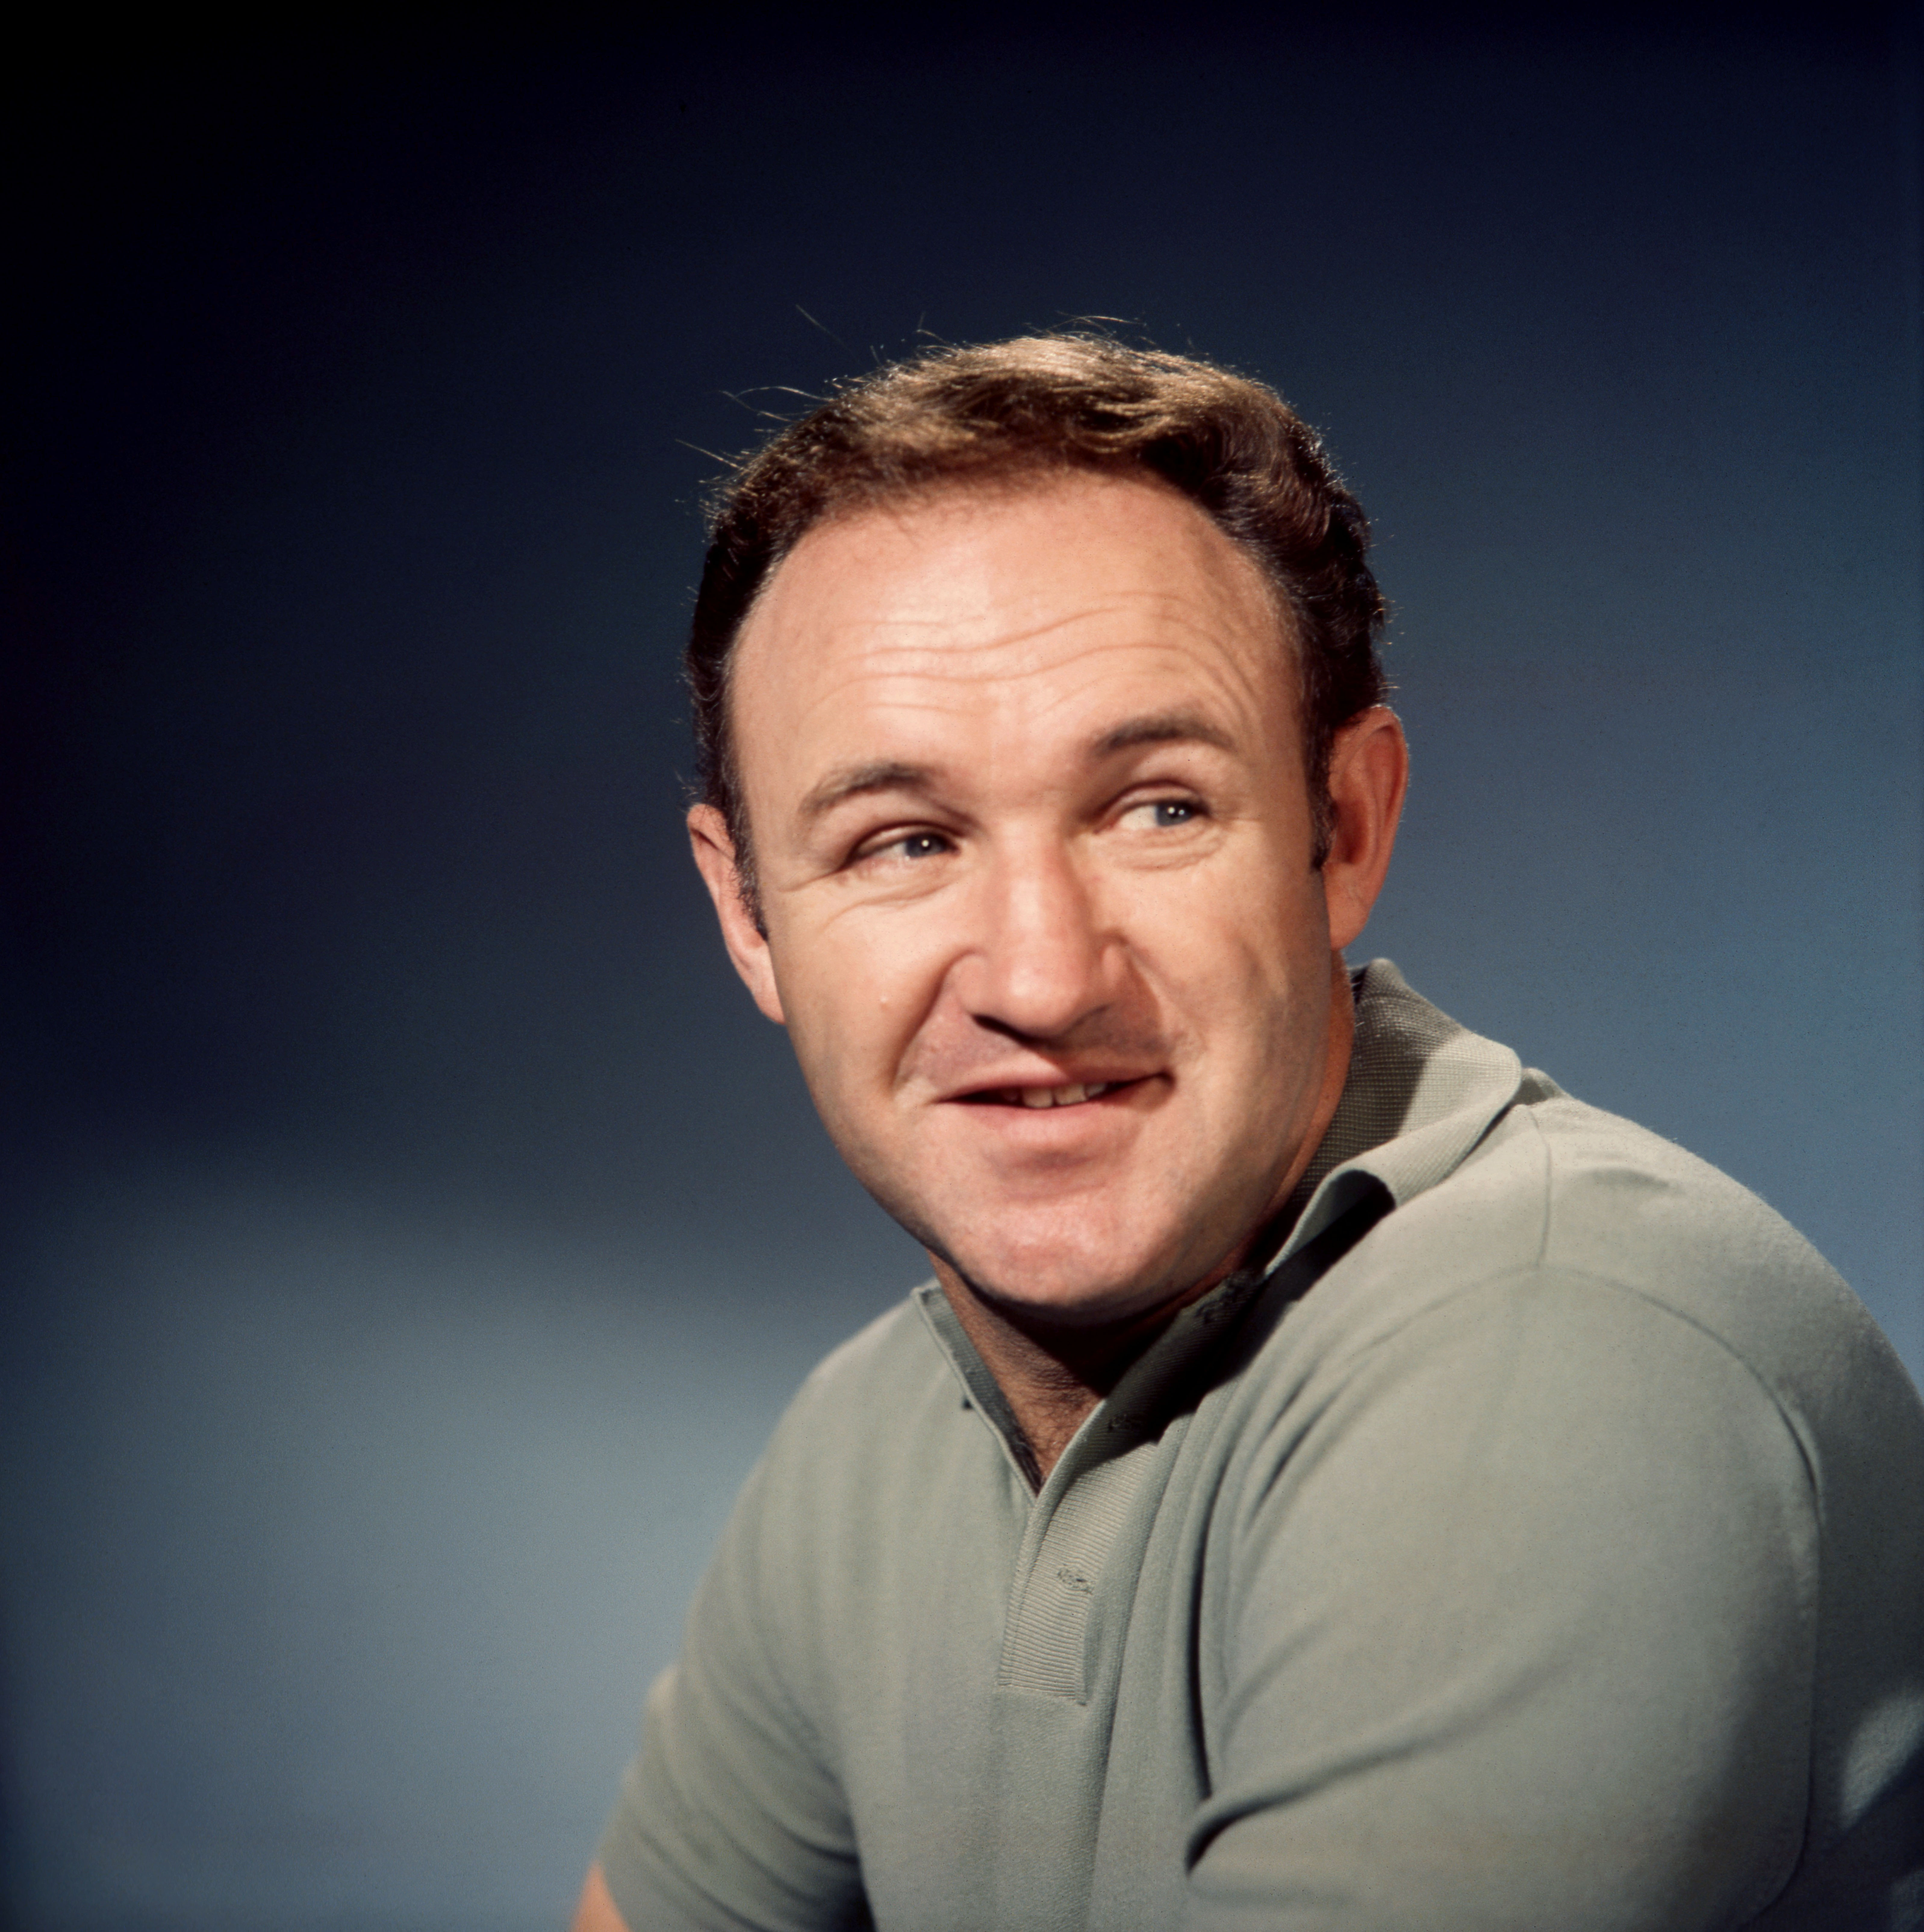 Gene Hackman poses for a portrait, circa 1965 | Source: Getty Images